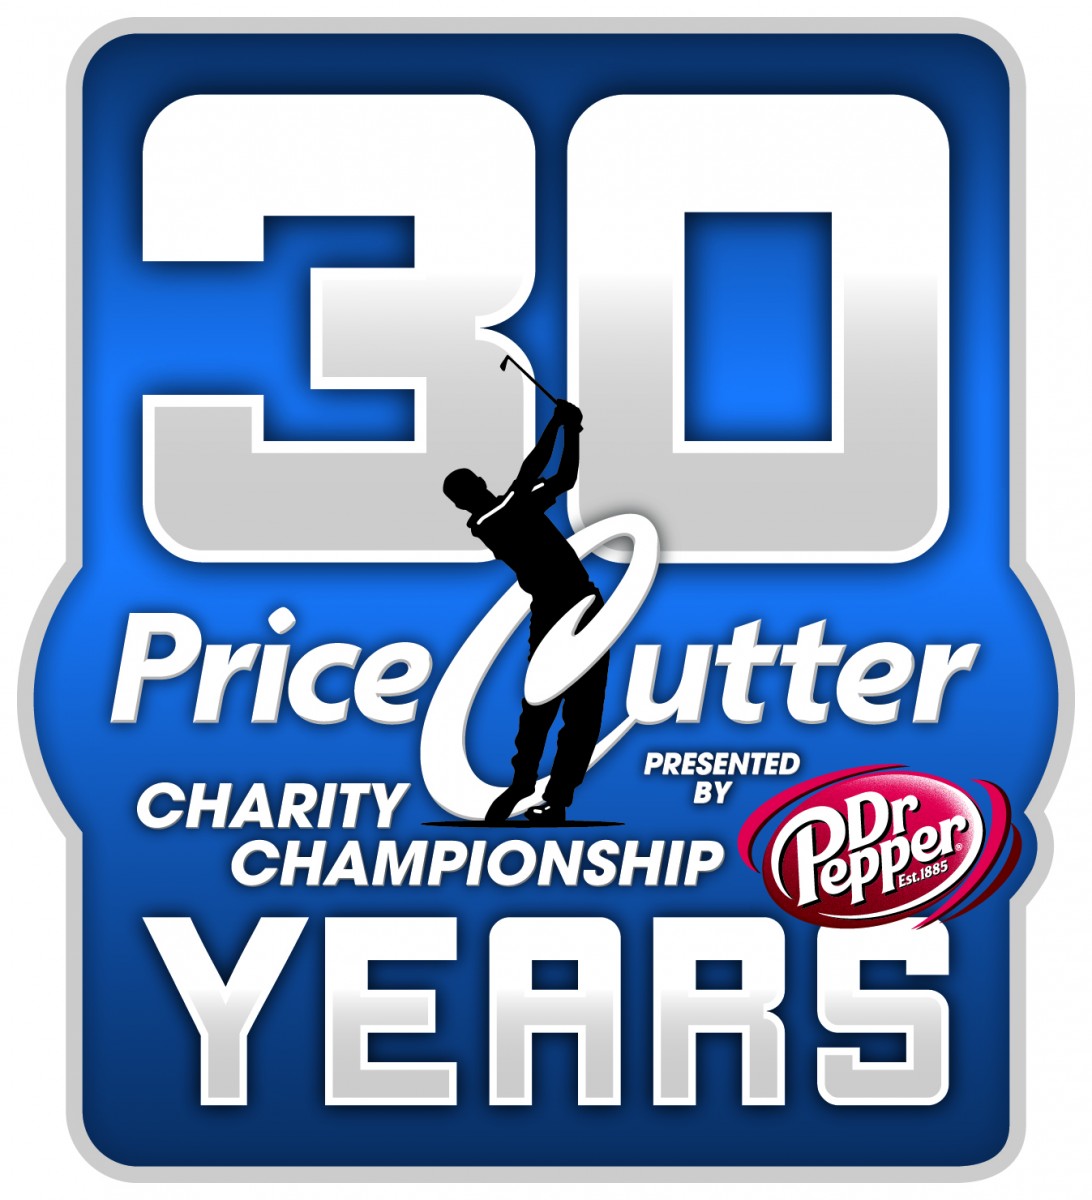 Price Cutter Charity Championship presented by Dr Pepper Price Cutter